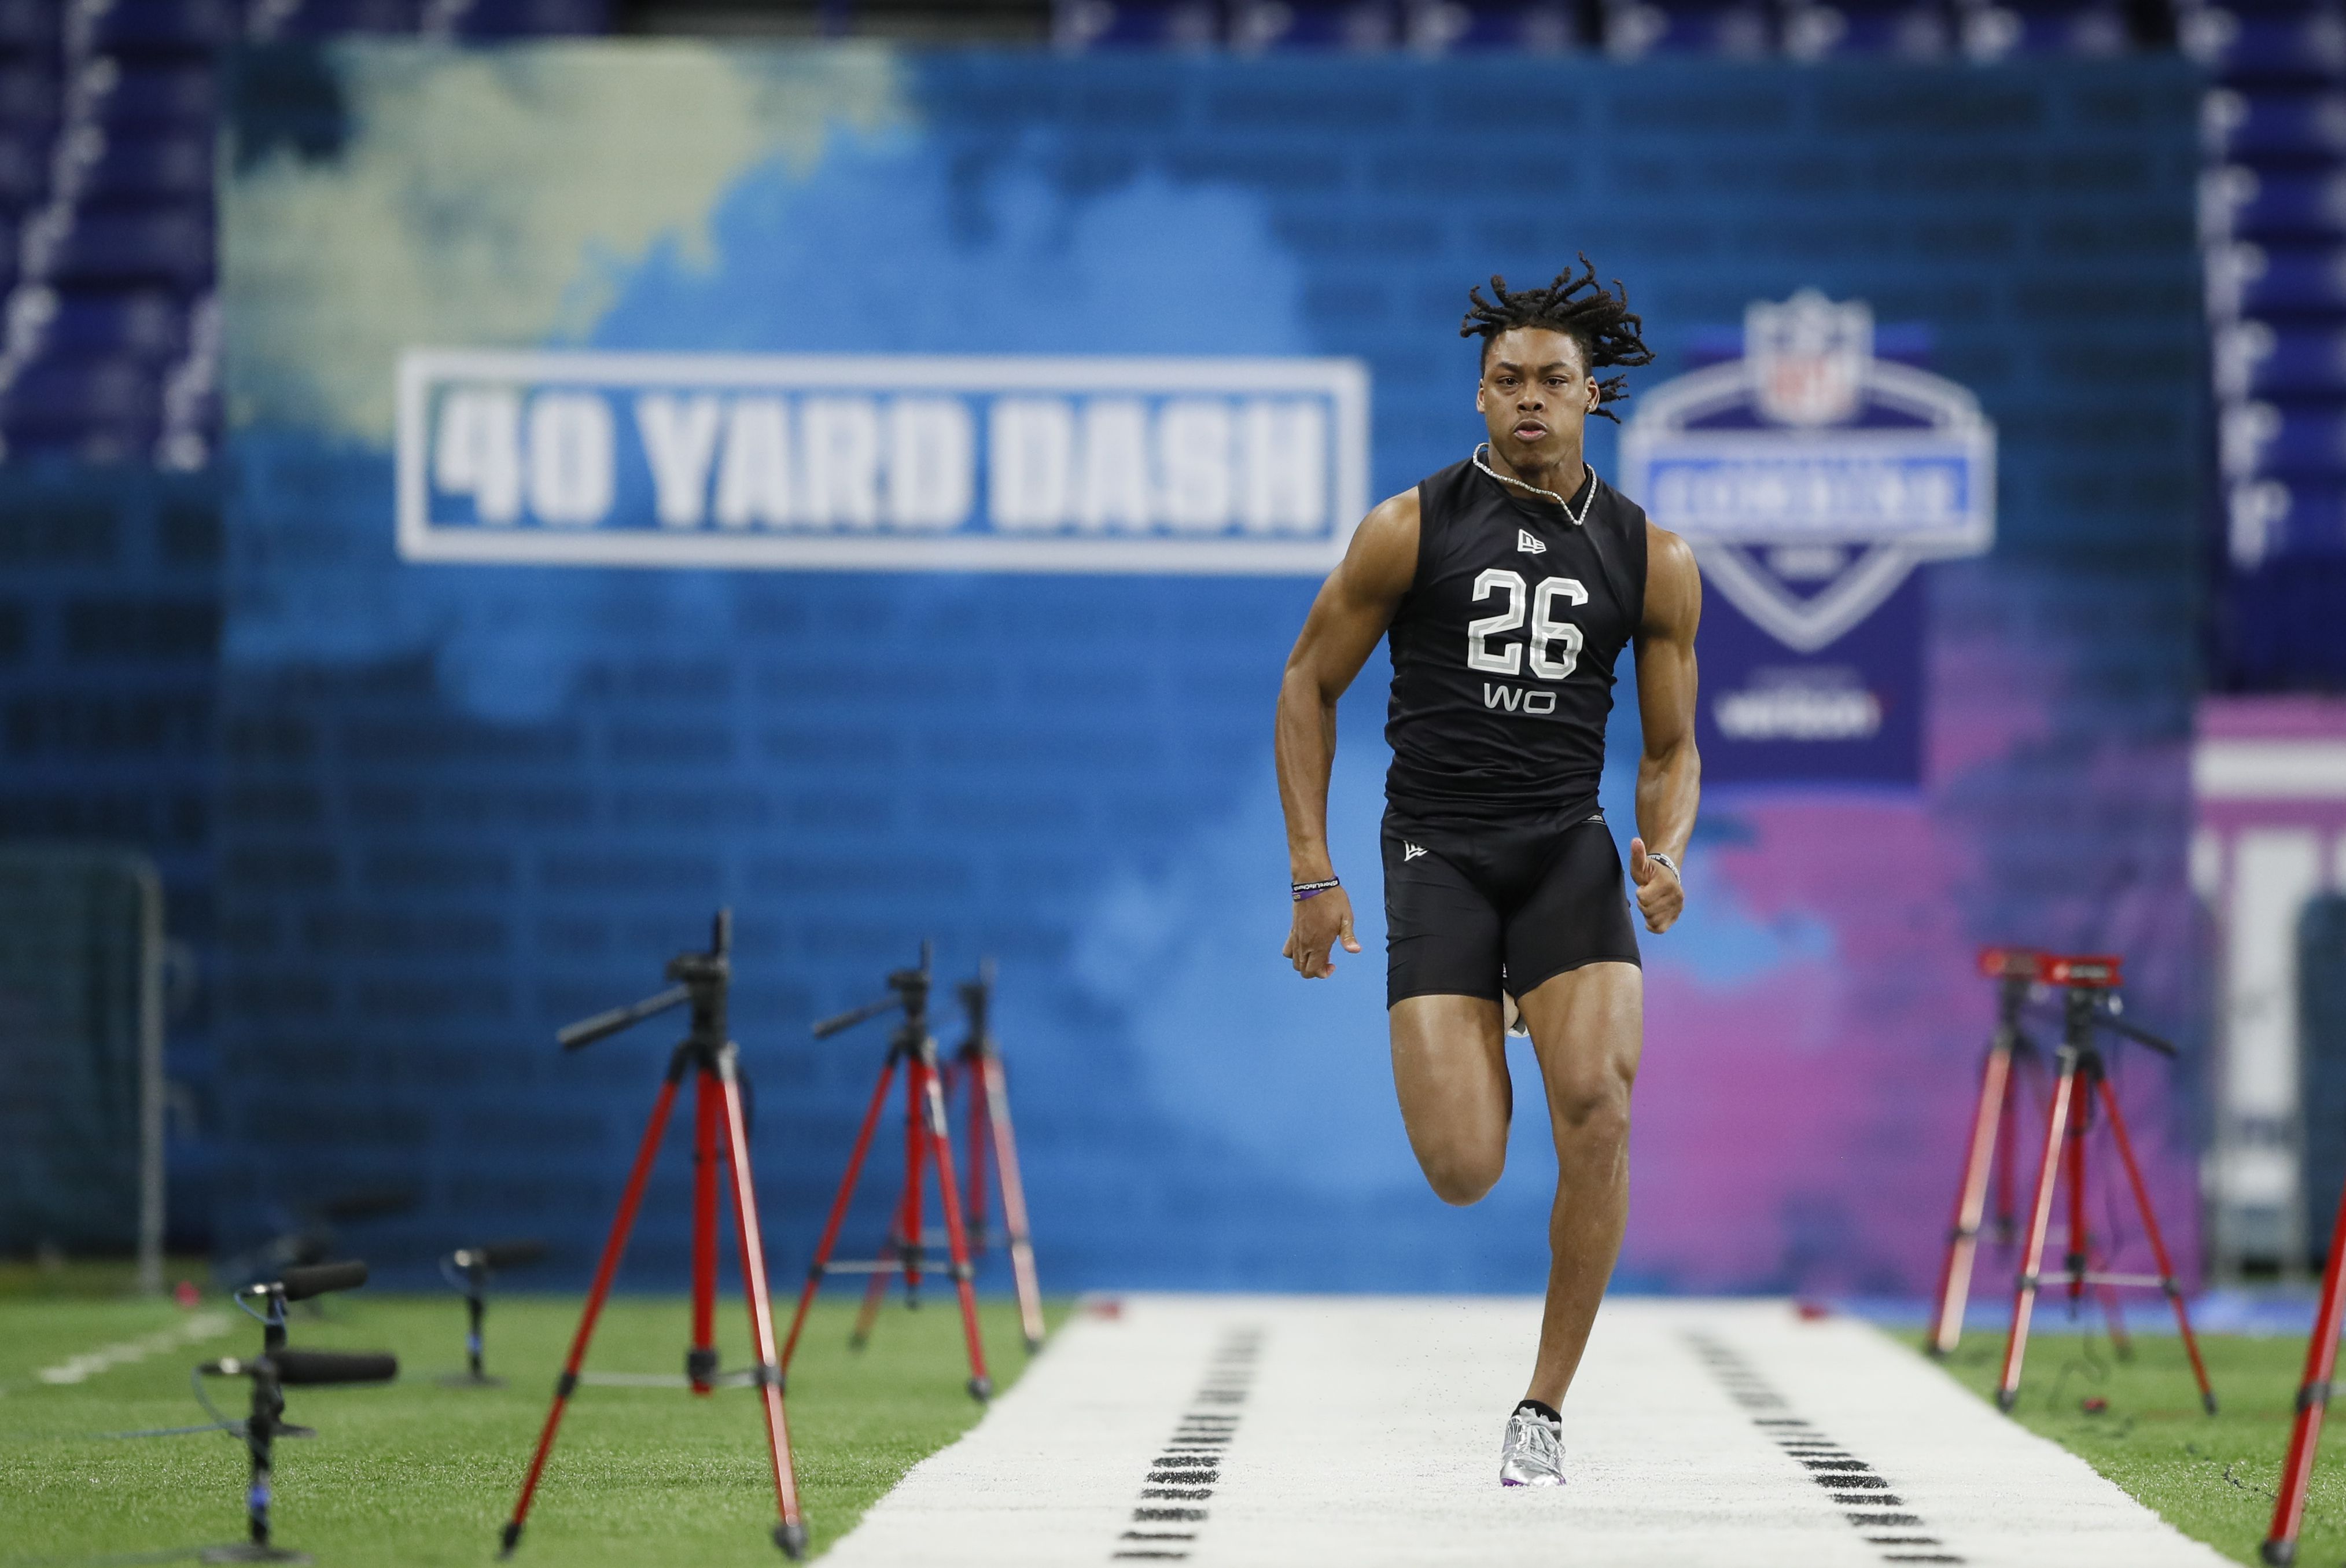 7 takeaways from the top RB, OL performances at NFL Combine